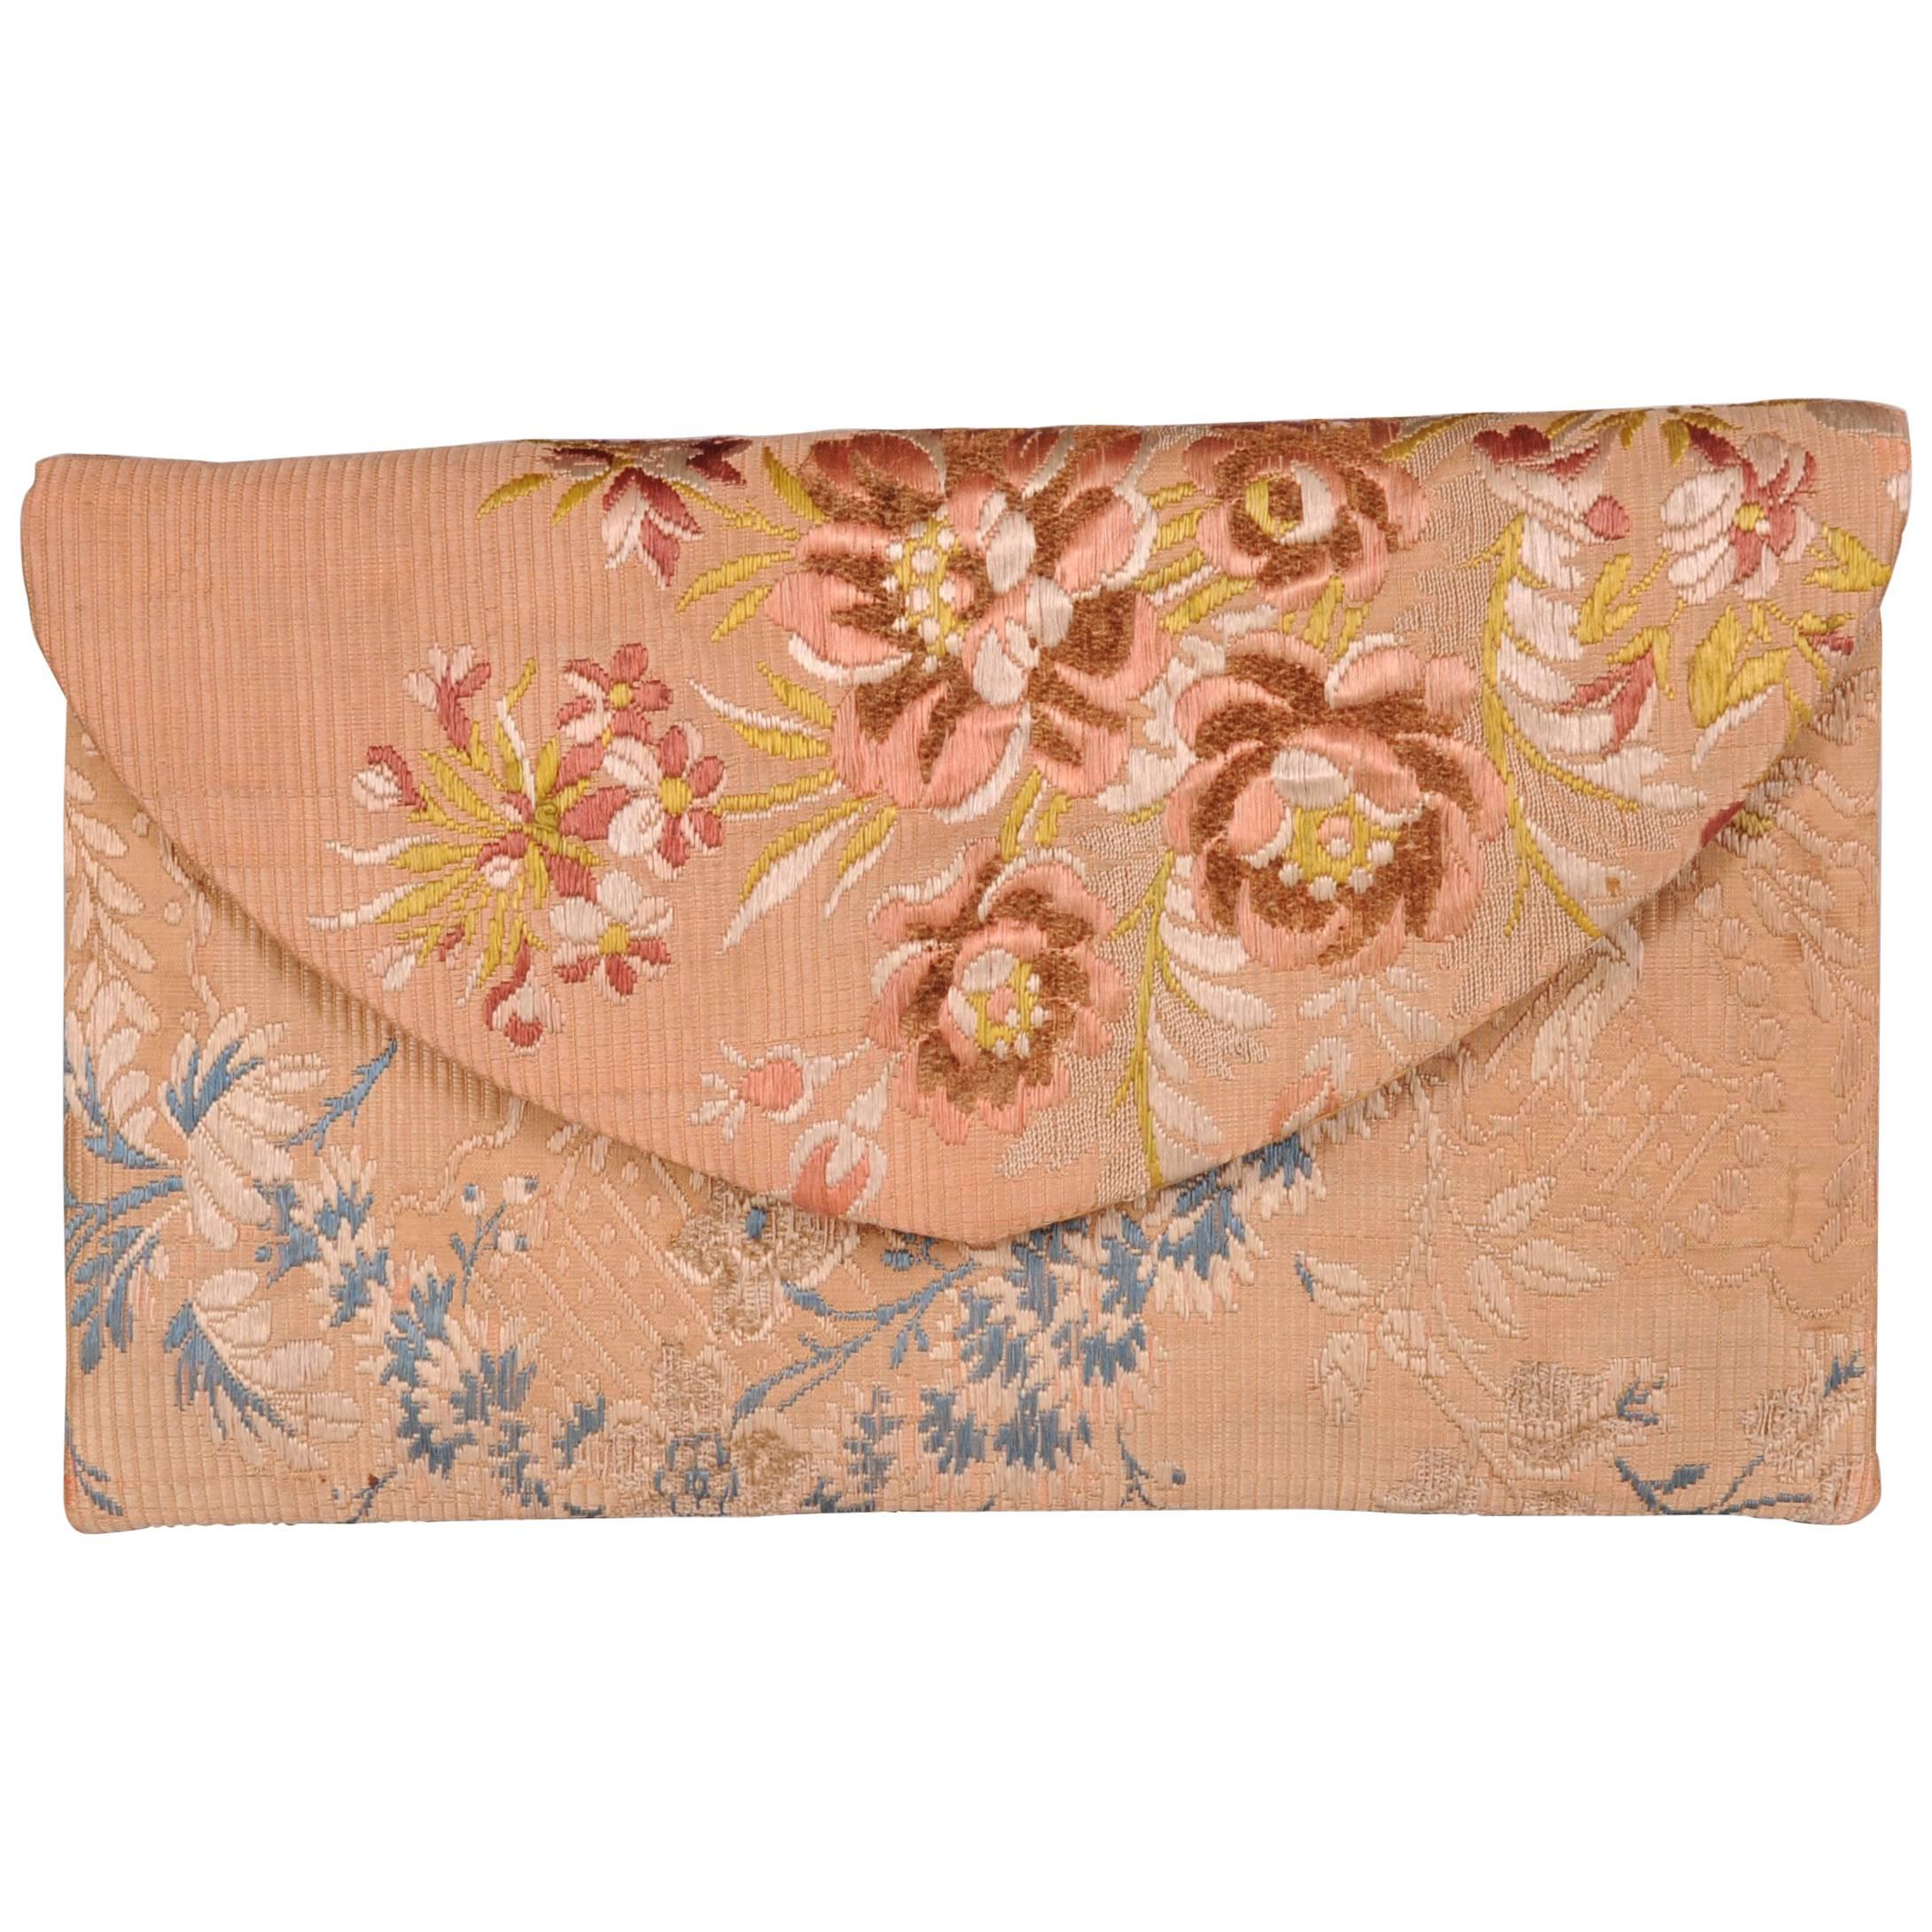 20th Century Bag of 18th Century Imperial Russian Brocade, A La Vieille Russie For Sale